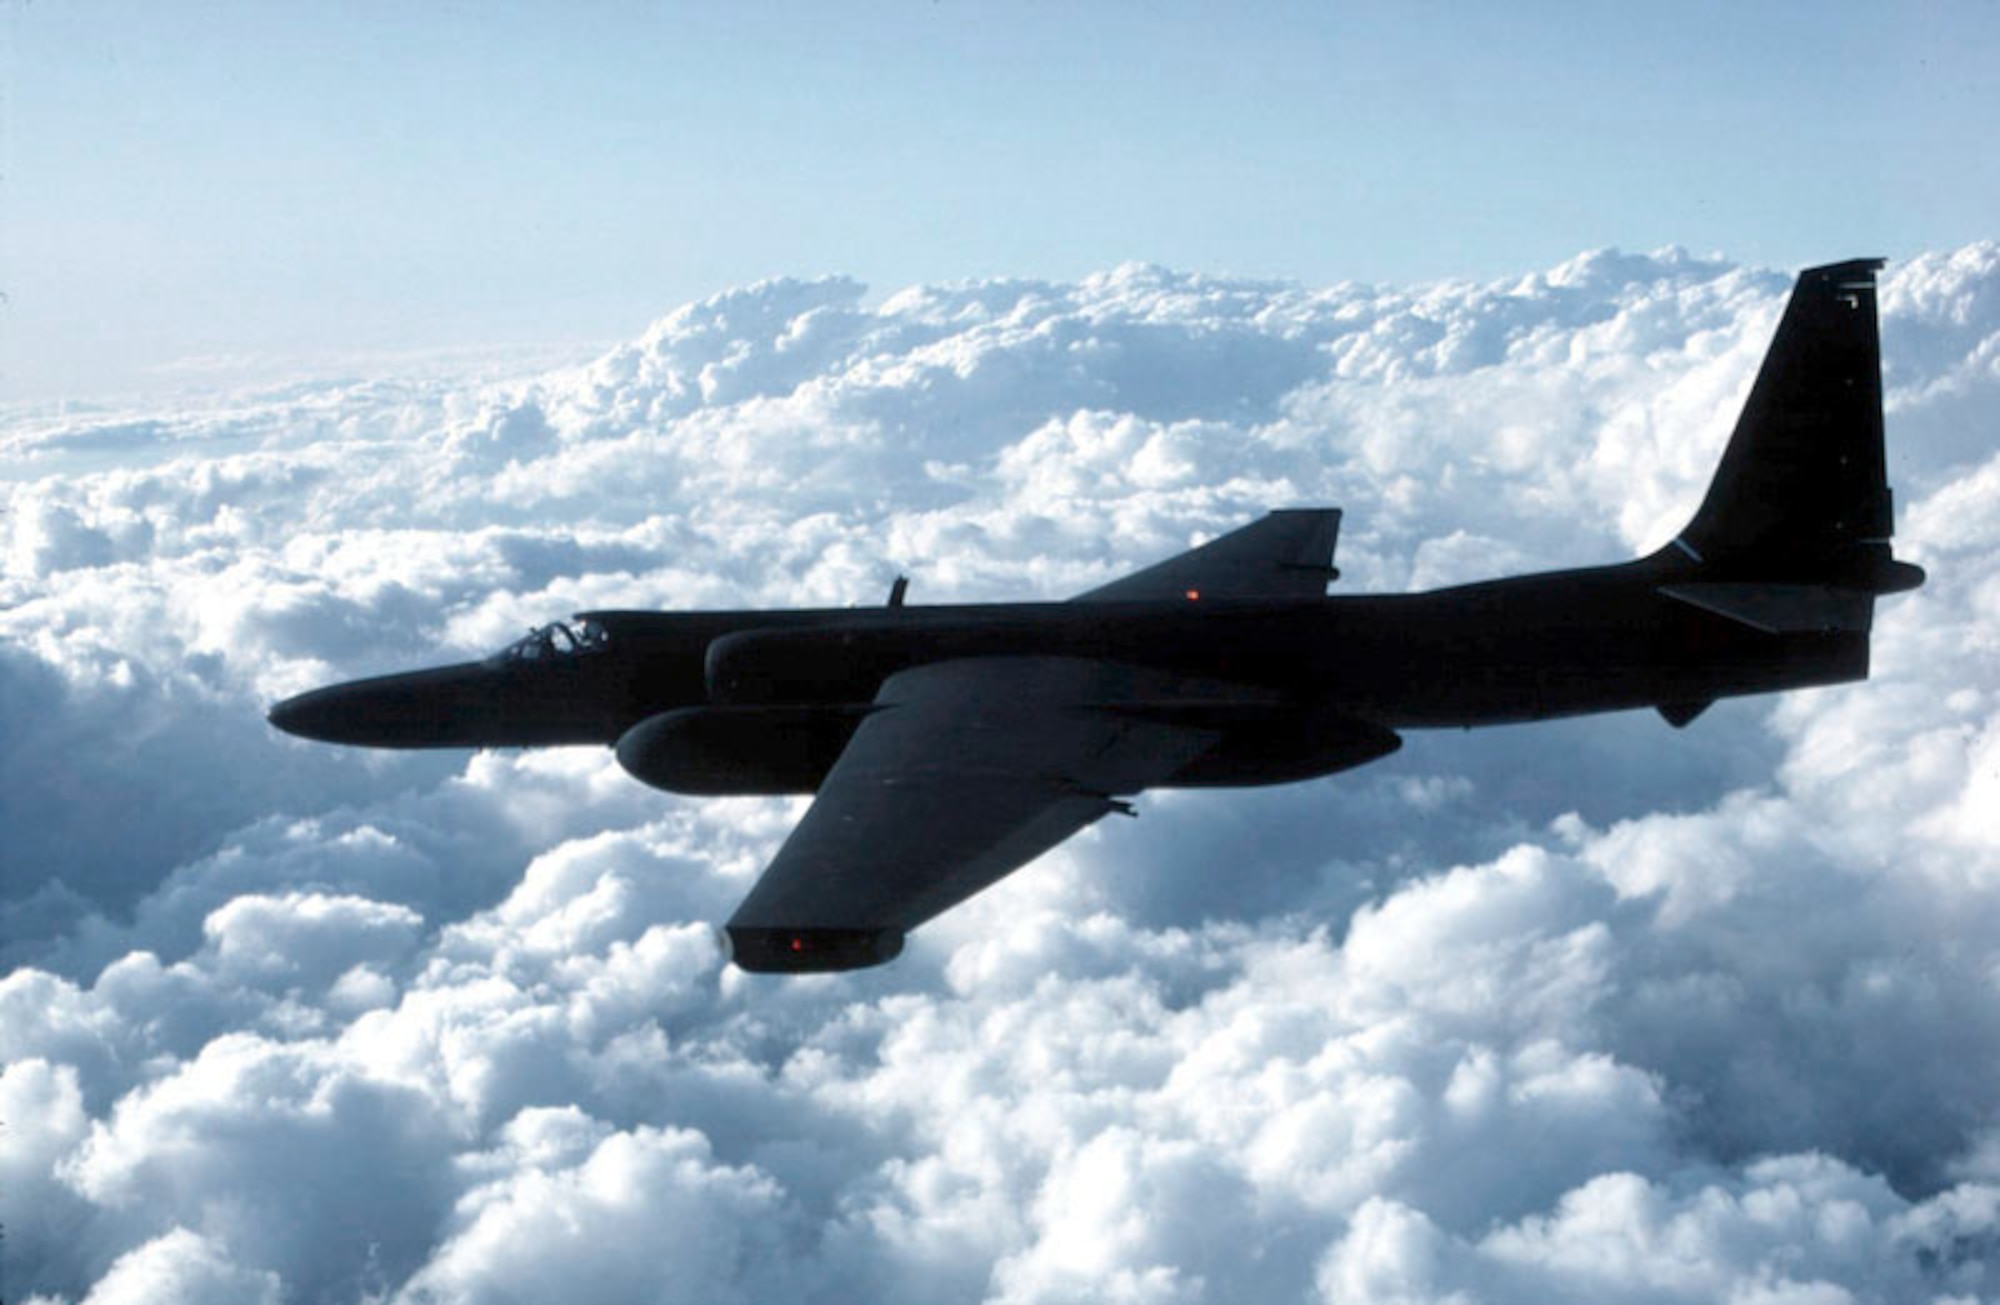 The U-2 Dragon Lady is considered the leader among manned intelligence, surveillance and reconnaissance sytems. An aircraft such as this collected images over the Gulf Coast region last year after Hurricanes Katrina and Rita. (U.S. Air Force photo)